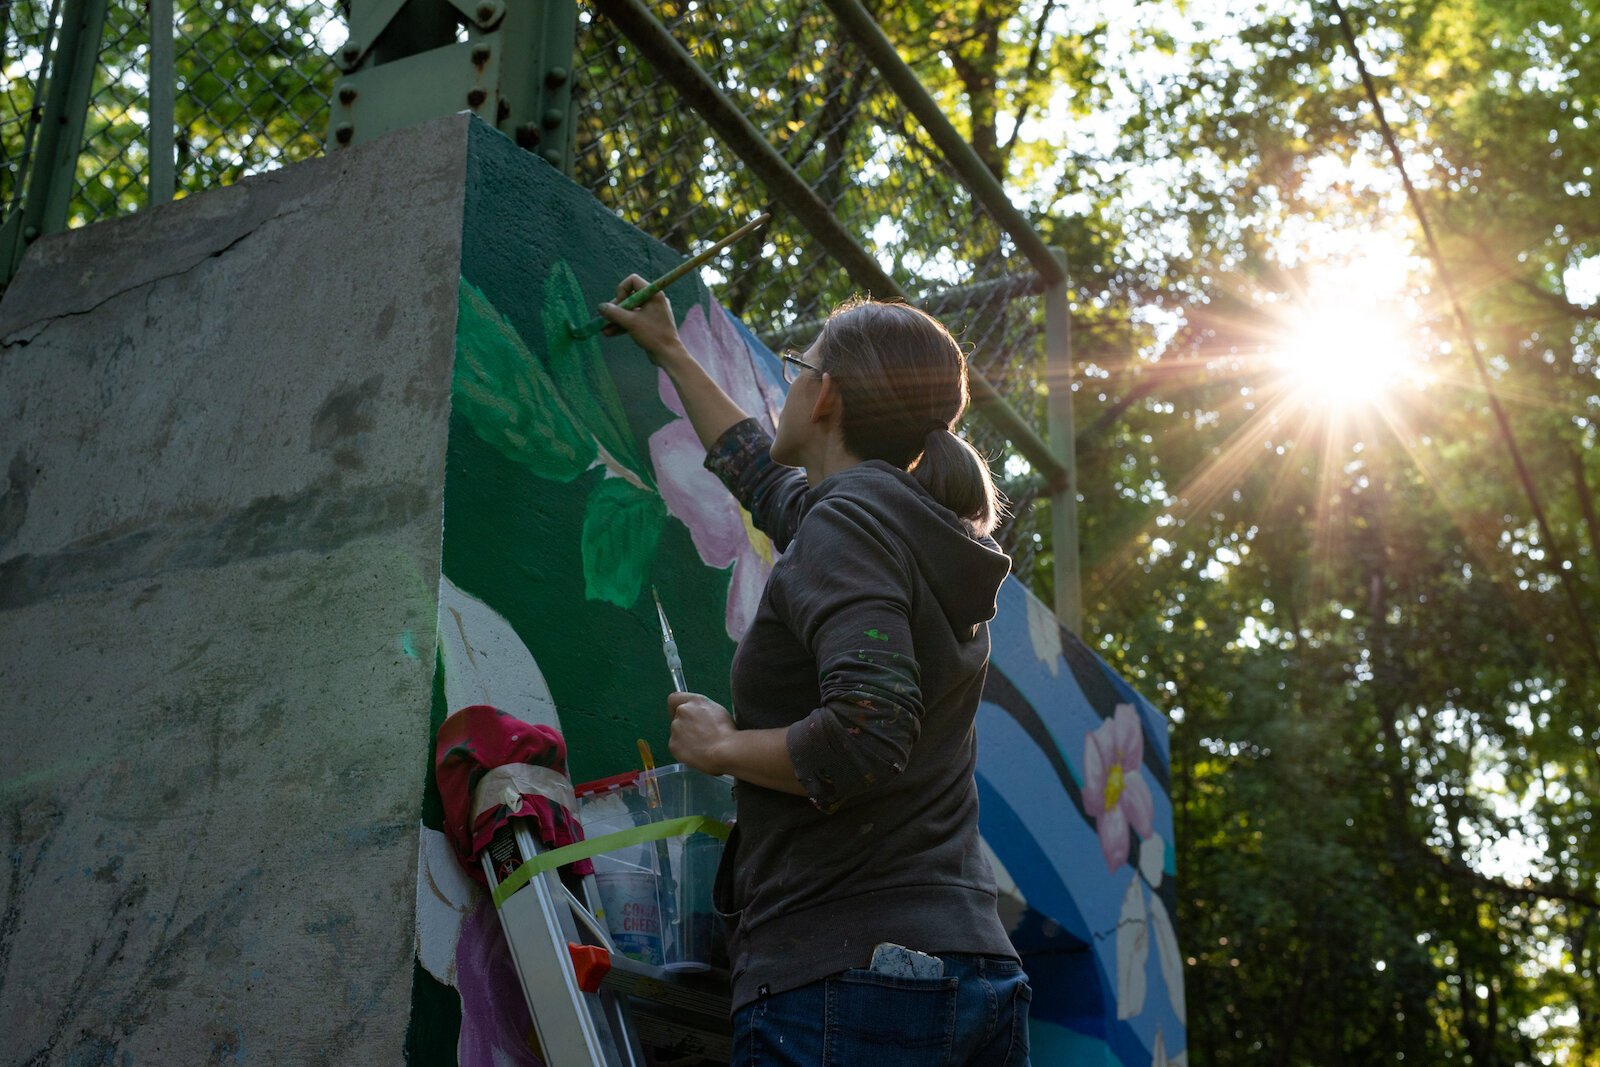 Suzanne Rhee works on her mural in Foster Park.